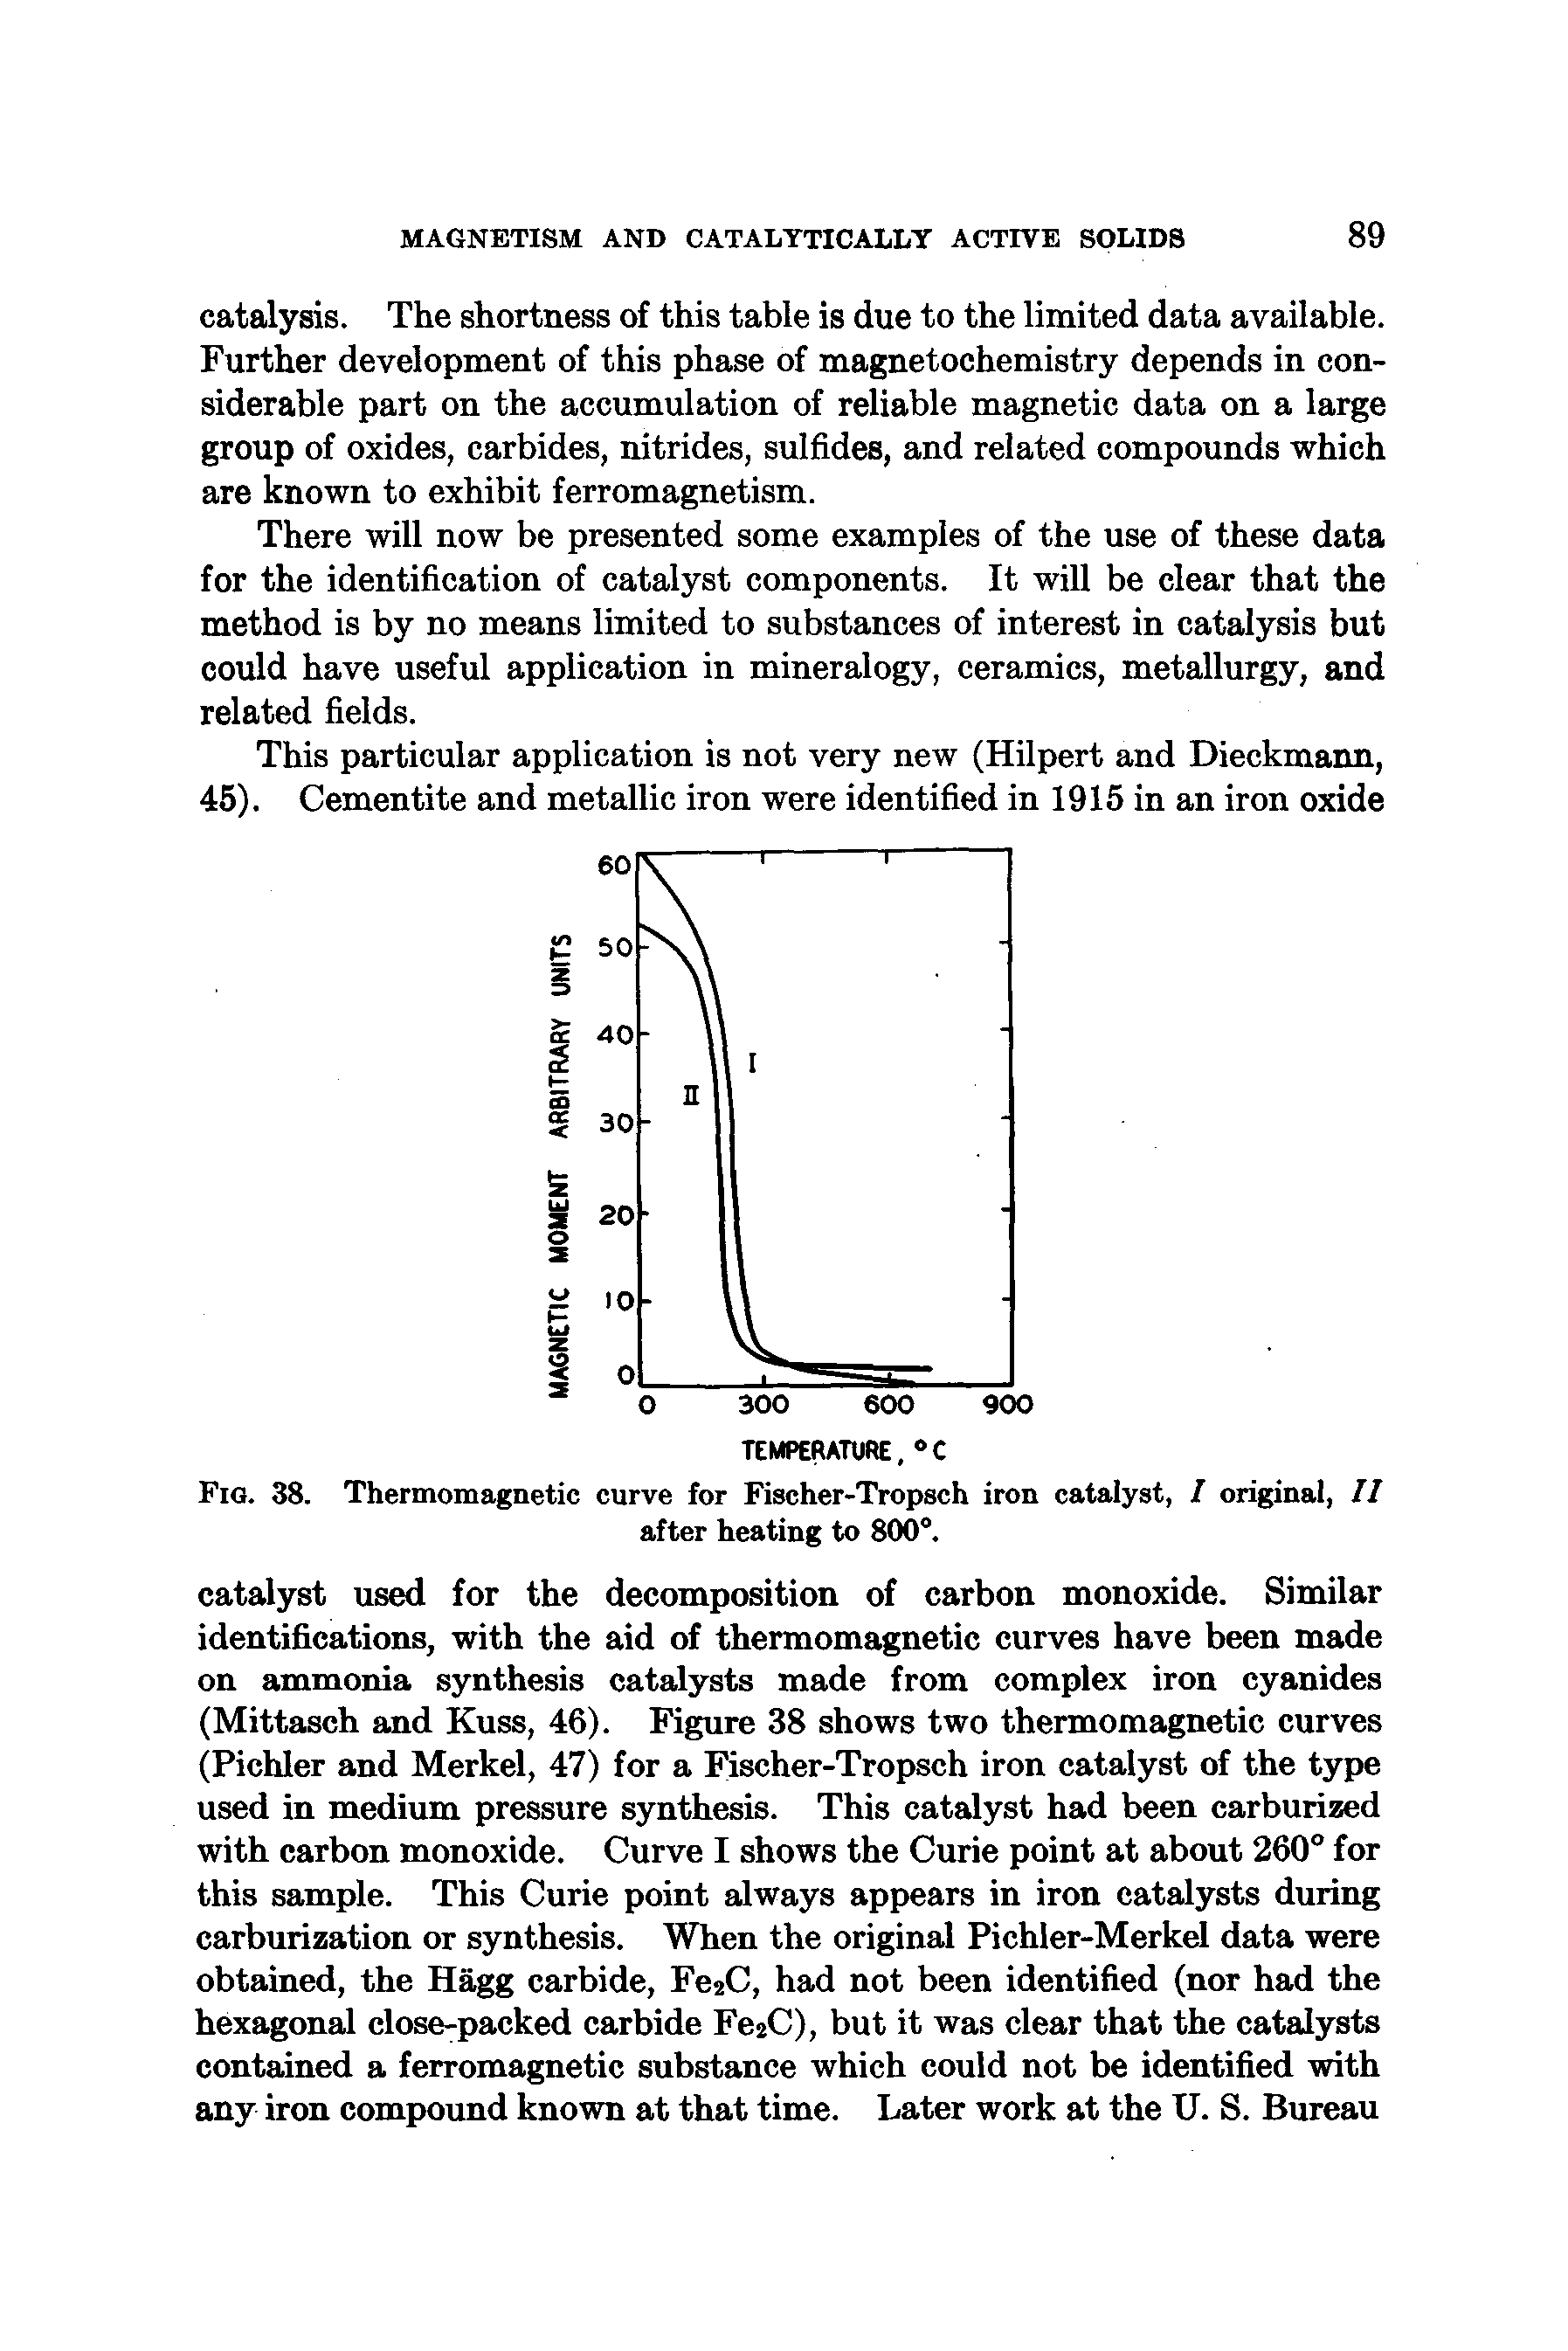 Fig. 38. Thermomagnetic curve for Fischer-Tropsch iron catalyst, / original, II...